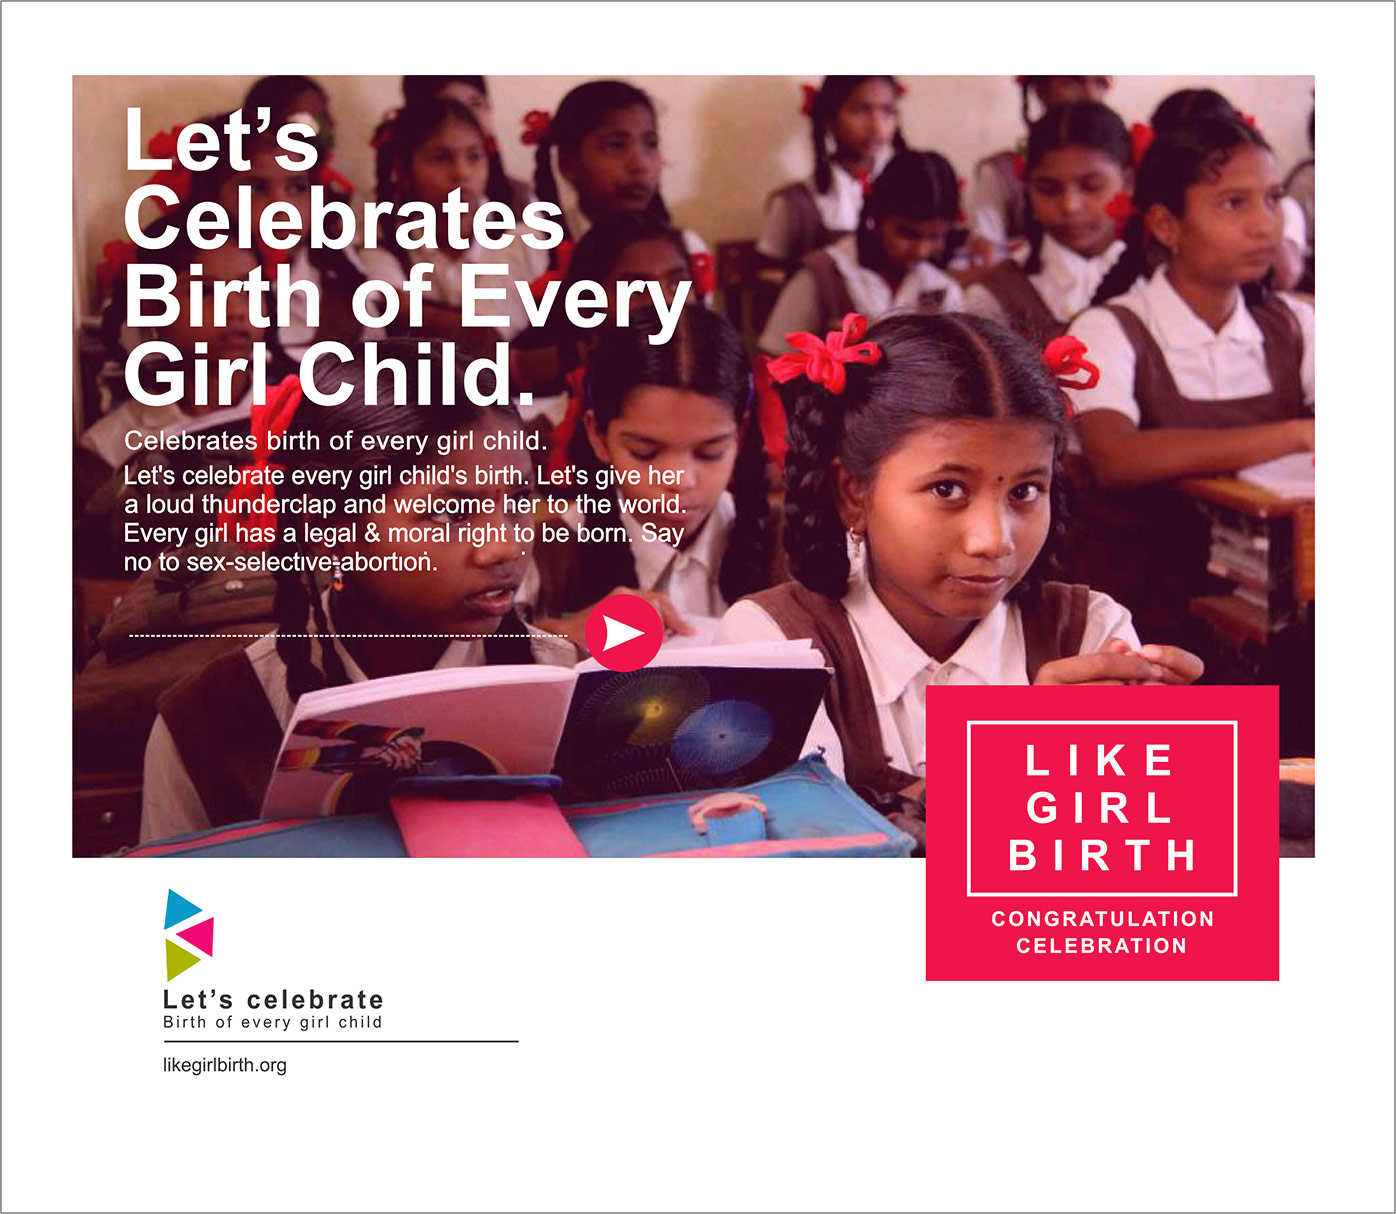 Celebrates birth of every girl child Campaigns of the World®